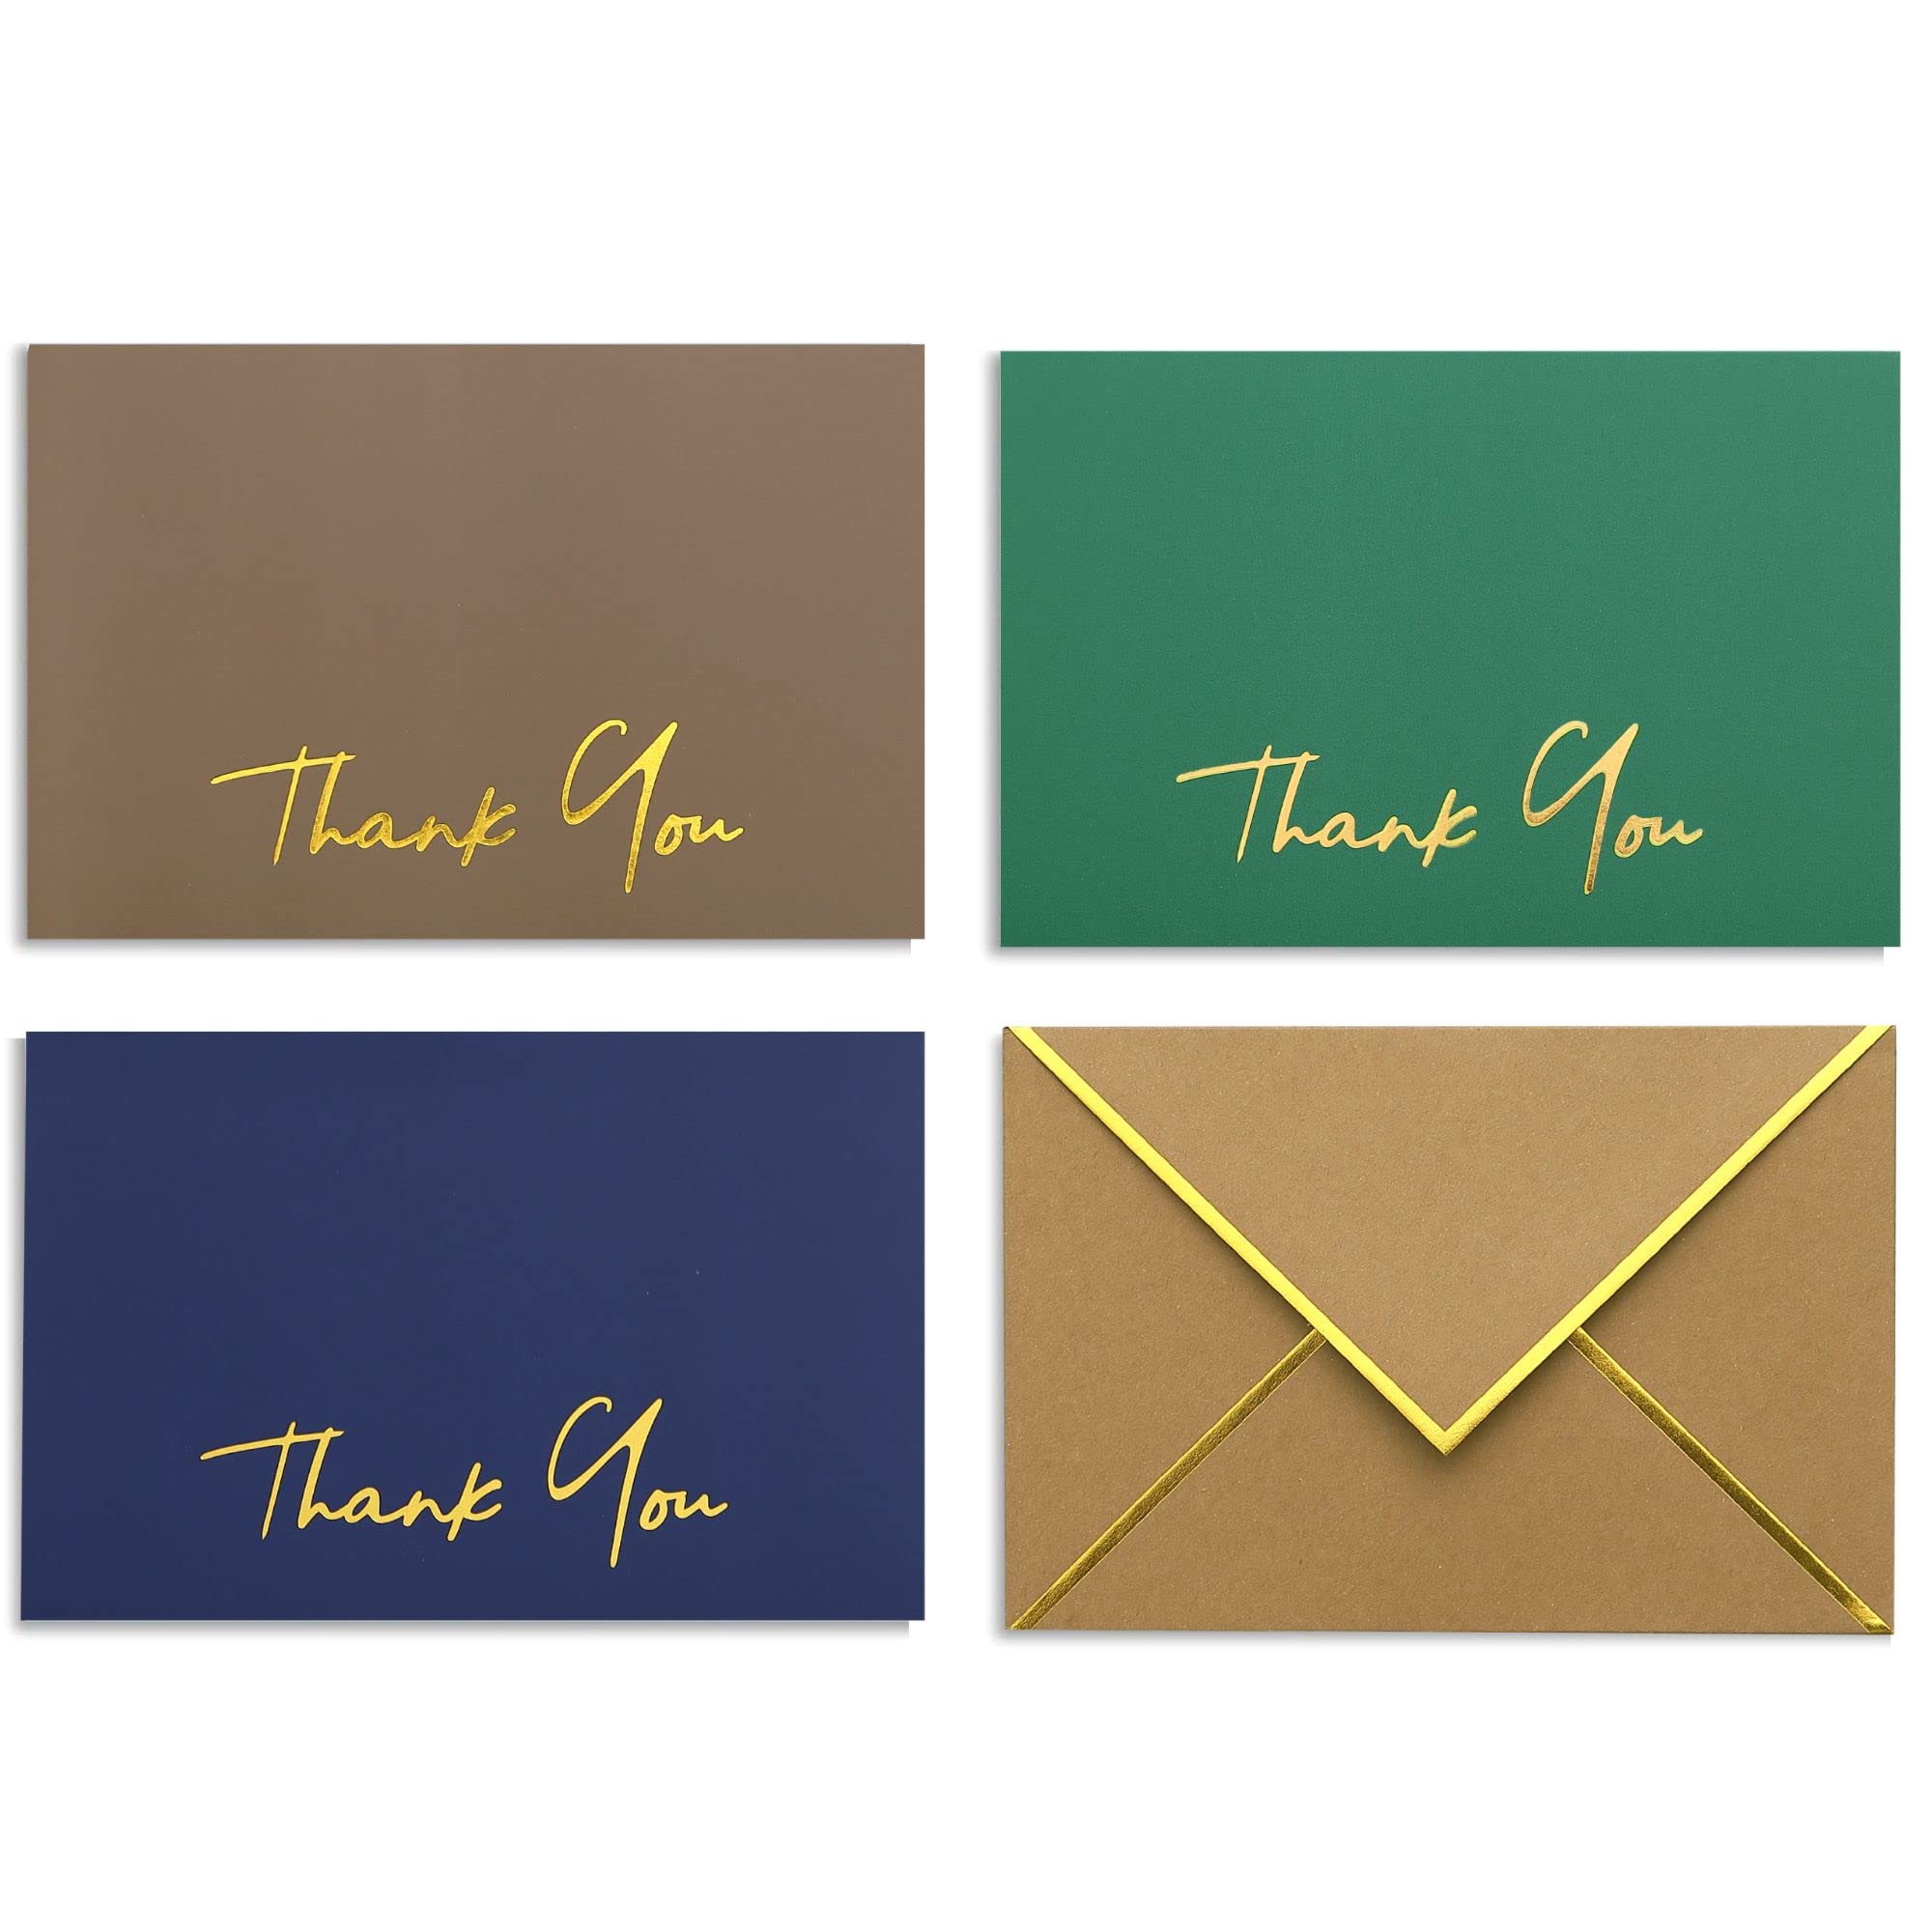 Heavy Duty Thank You Cards with Envelopes - 36 PK - Gold Thank You Notes 4x6 Inches Thank You Cards Wedding Thank You Cards Small Business Graduation Bridal Shower Vintage Navy Green Brown